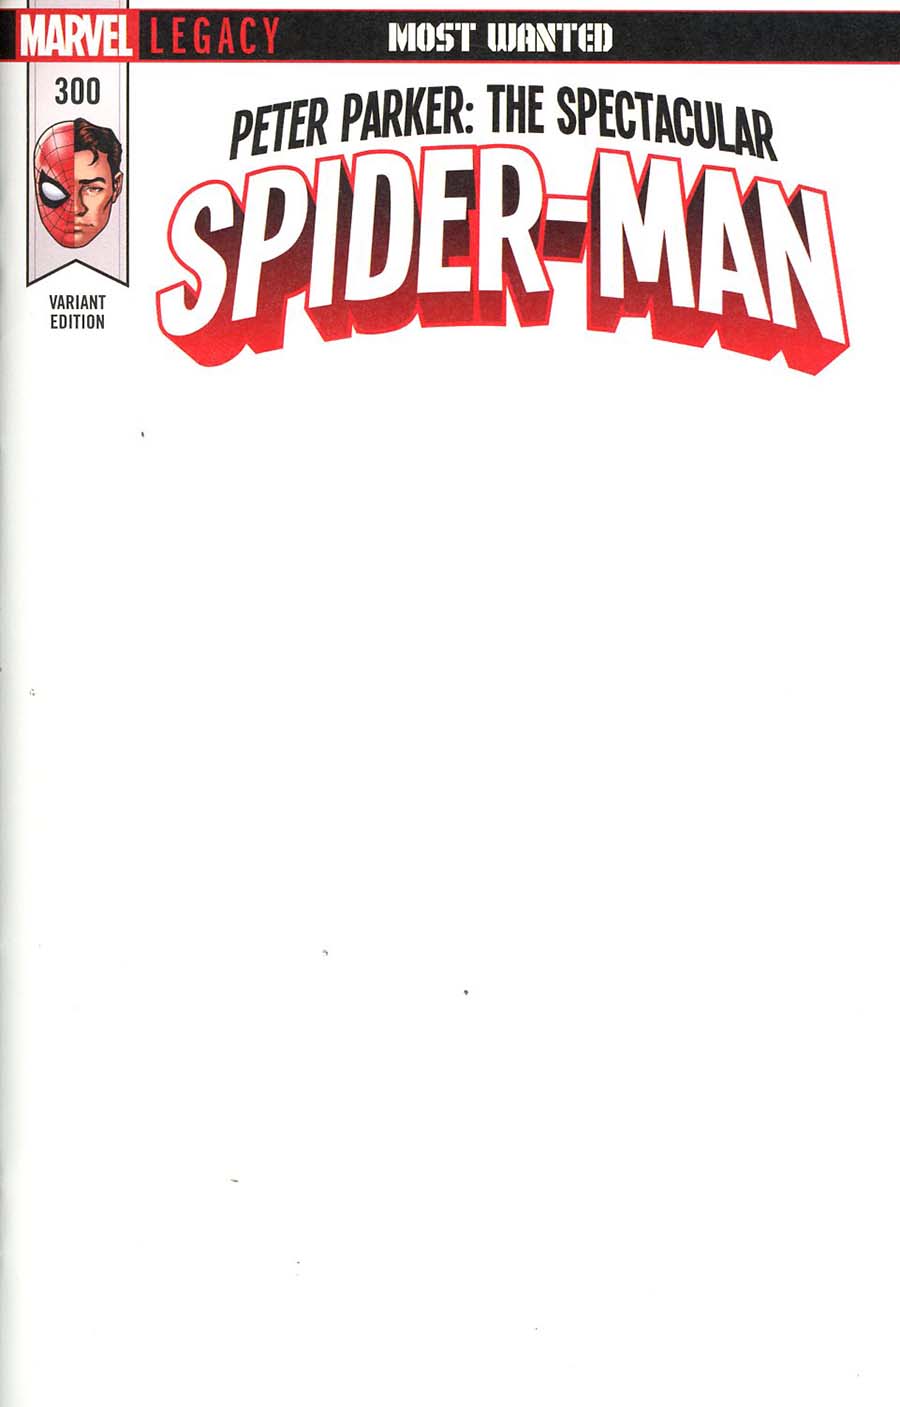 Peter Parker Spectacular Spider-Man #300 Cover D Variant Blank Cover (Marvel Legacy Tie-In)